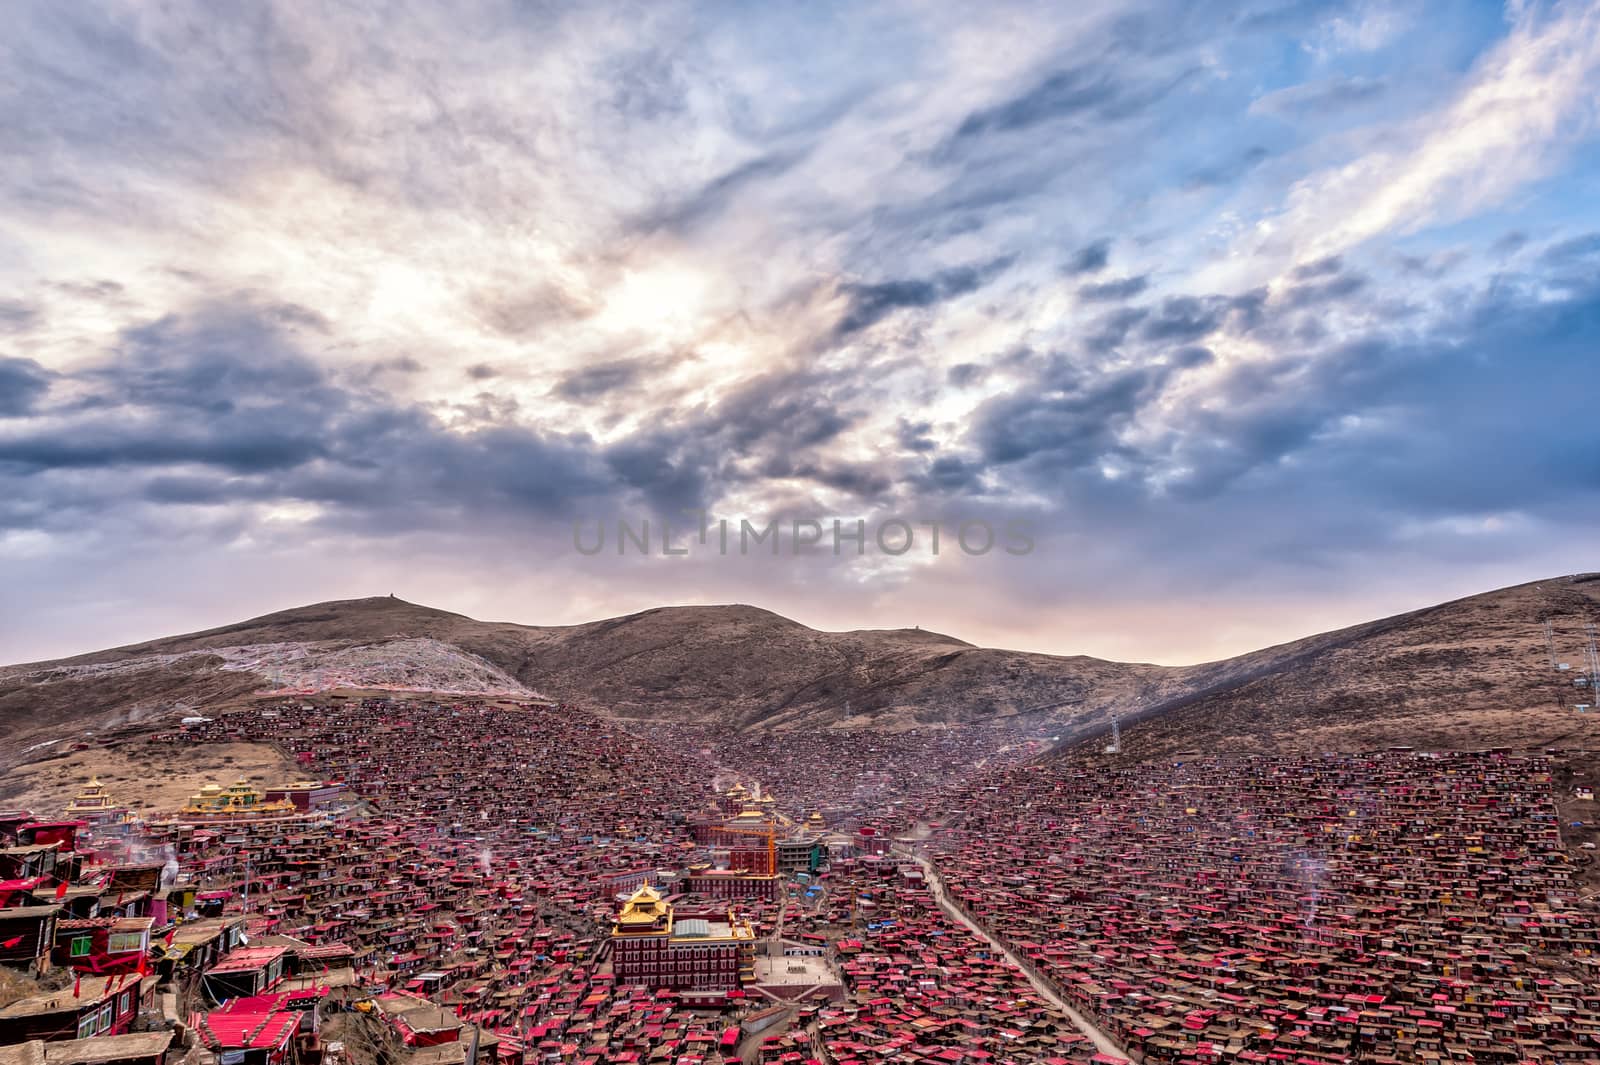 Lharong Monastery and the Monk houseson surrounded in Sertar, Tibet.  Lharong Monastery is a Tibetan Buddhist Institute at an elevation of about 4000 meters.